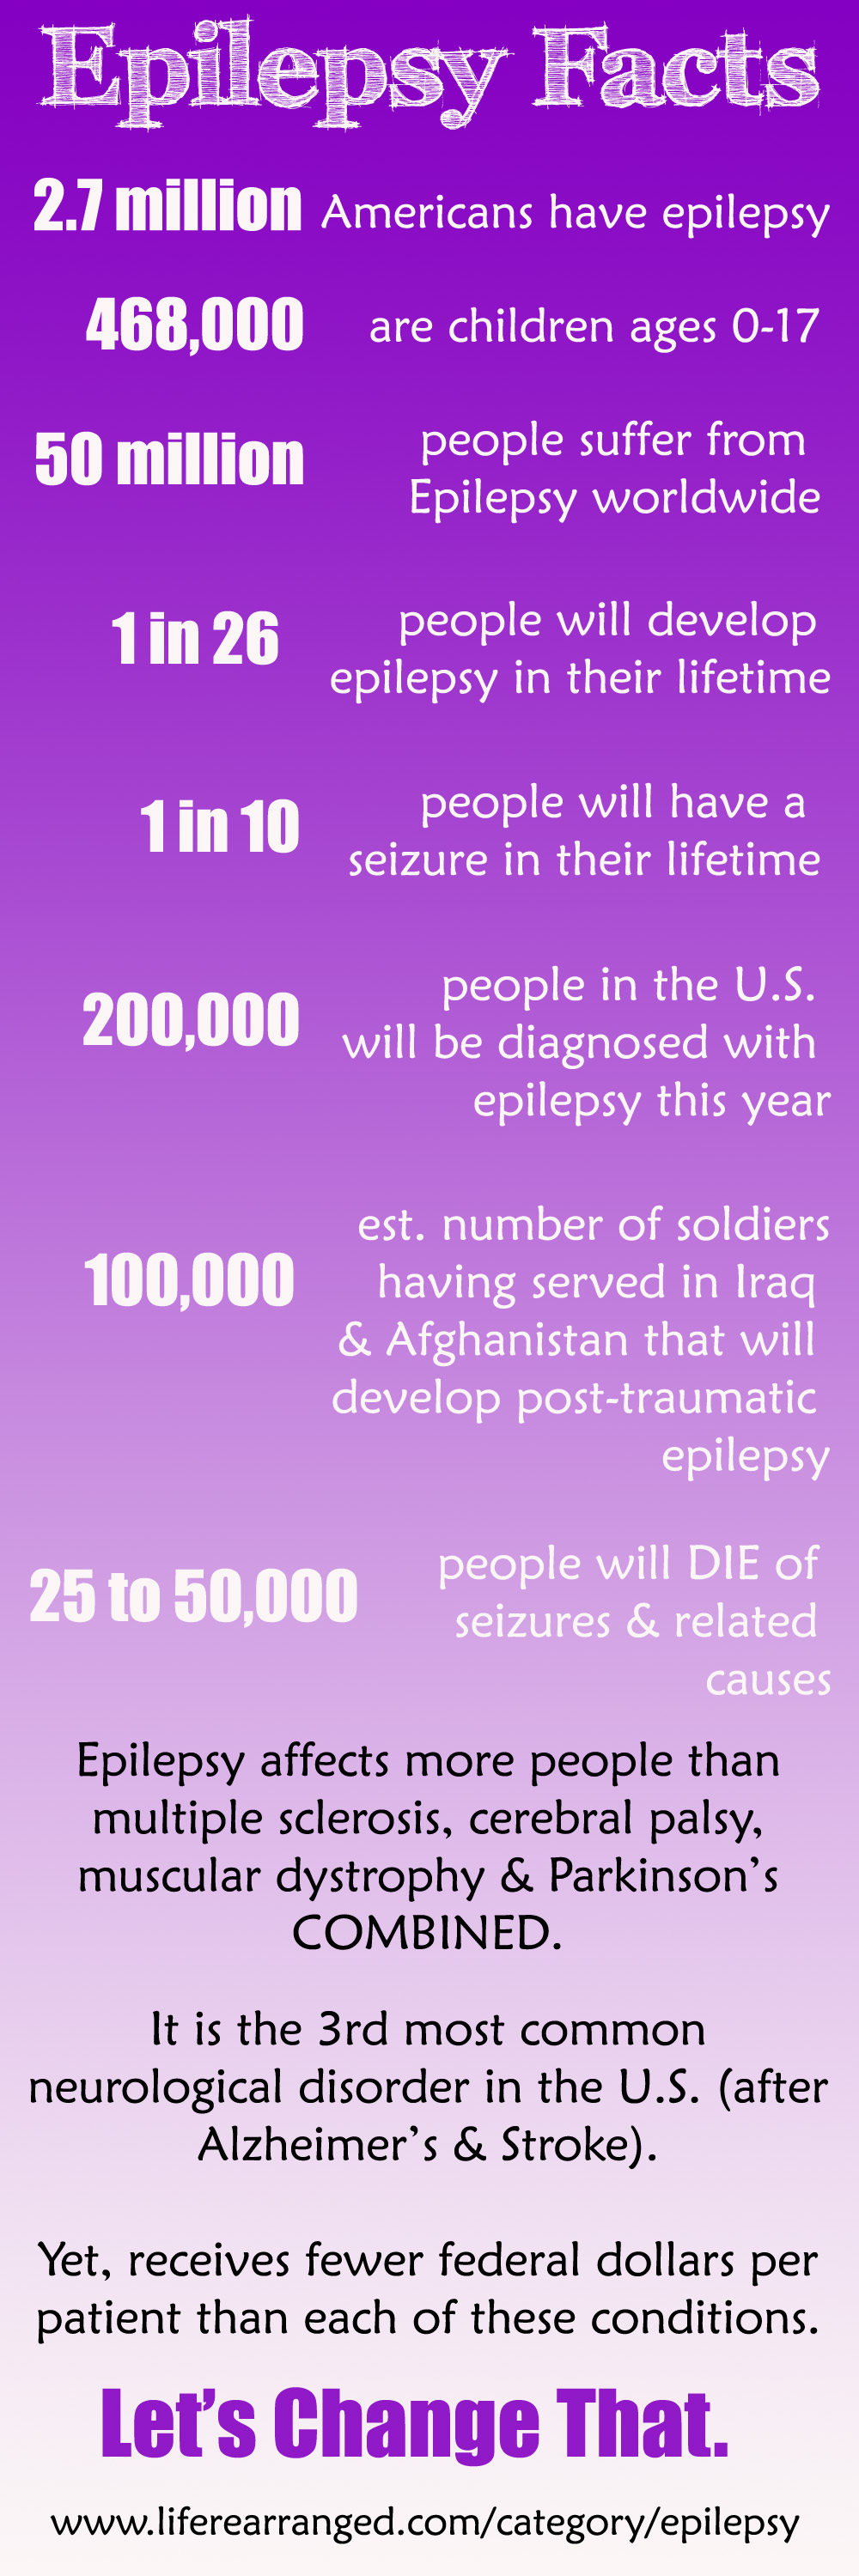 epilepsy facts infographic copy